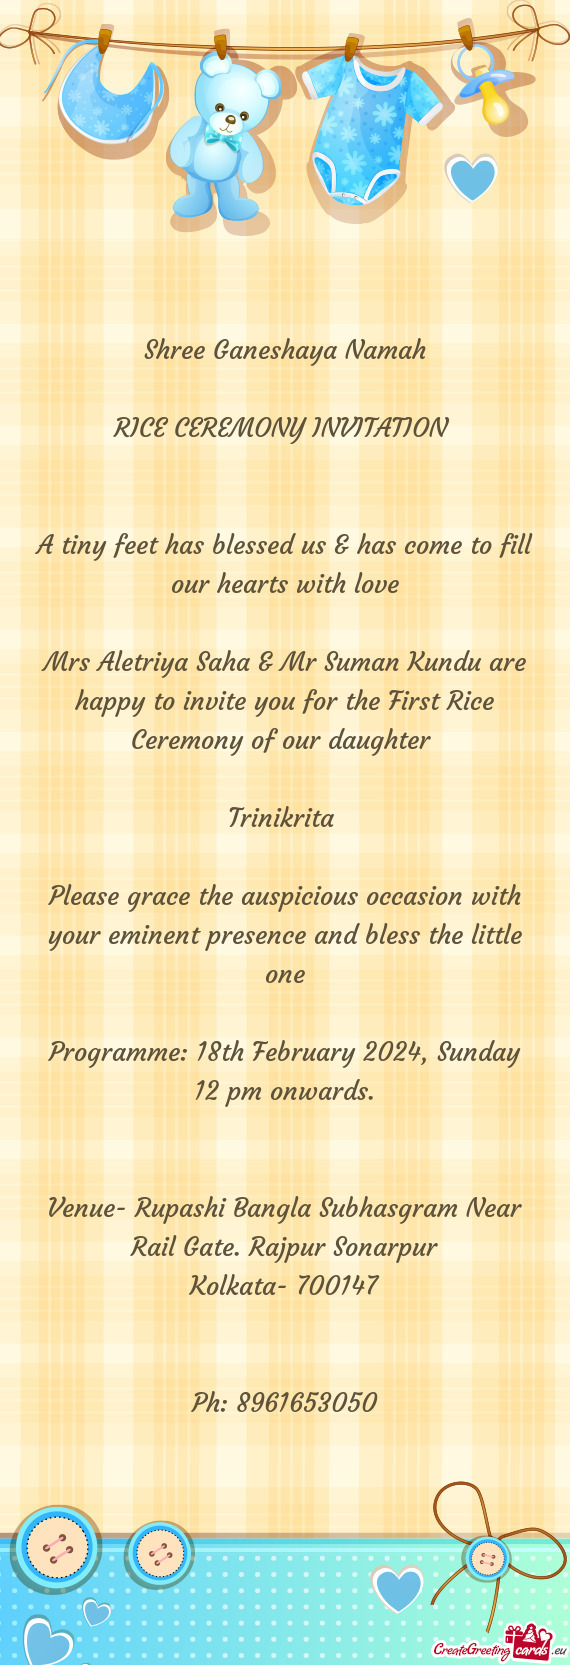 Mrs Aletriya Saha & Mr Suman Kundu are happy to invite you for the First Rice Ceremony of our daught